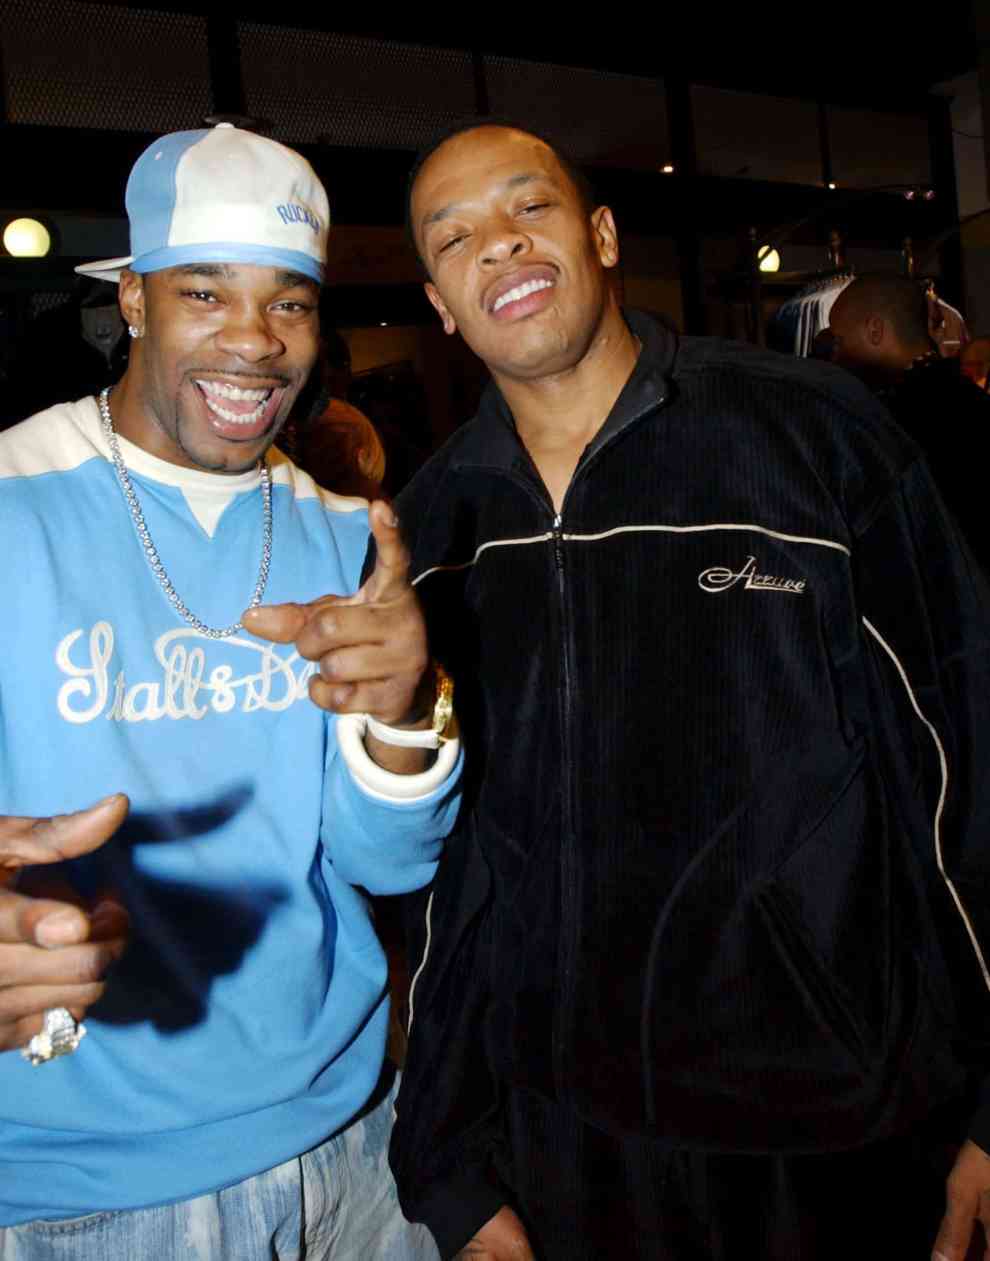 Busta Rhymes and Dr. Dre wearing blue and black